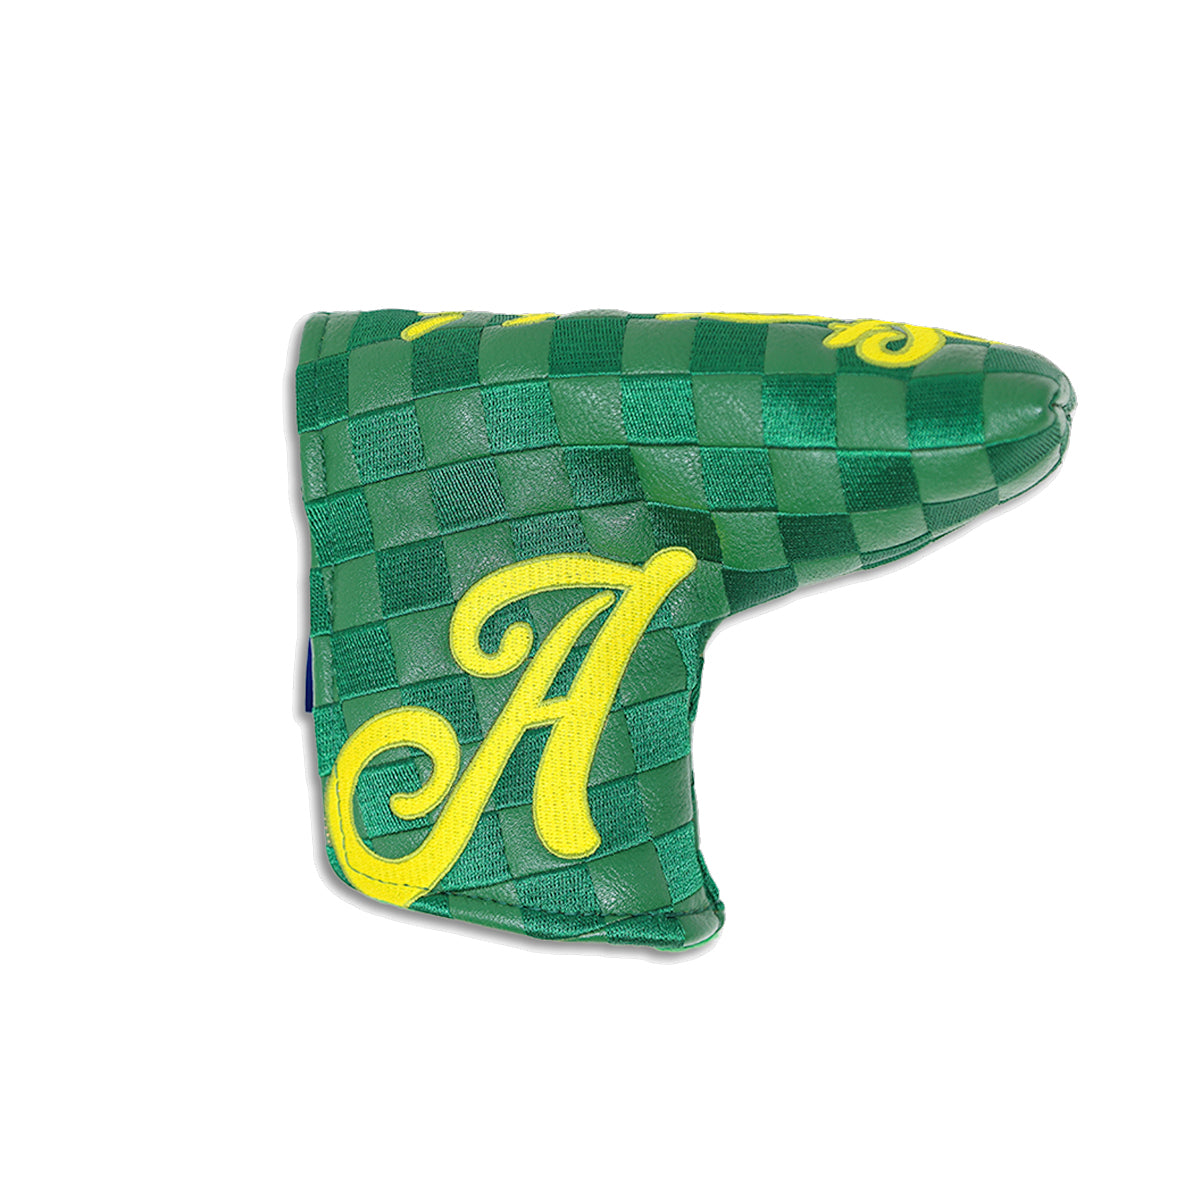 Classic Blade Putter Cover